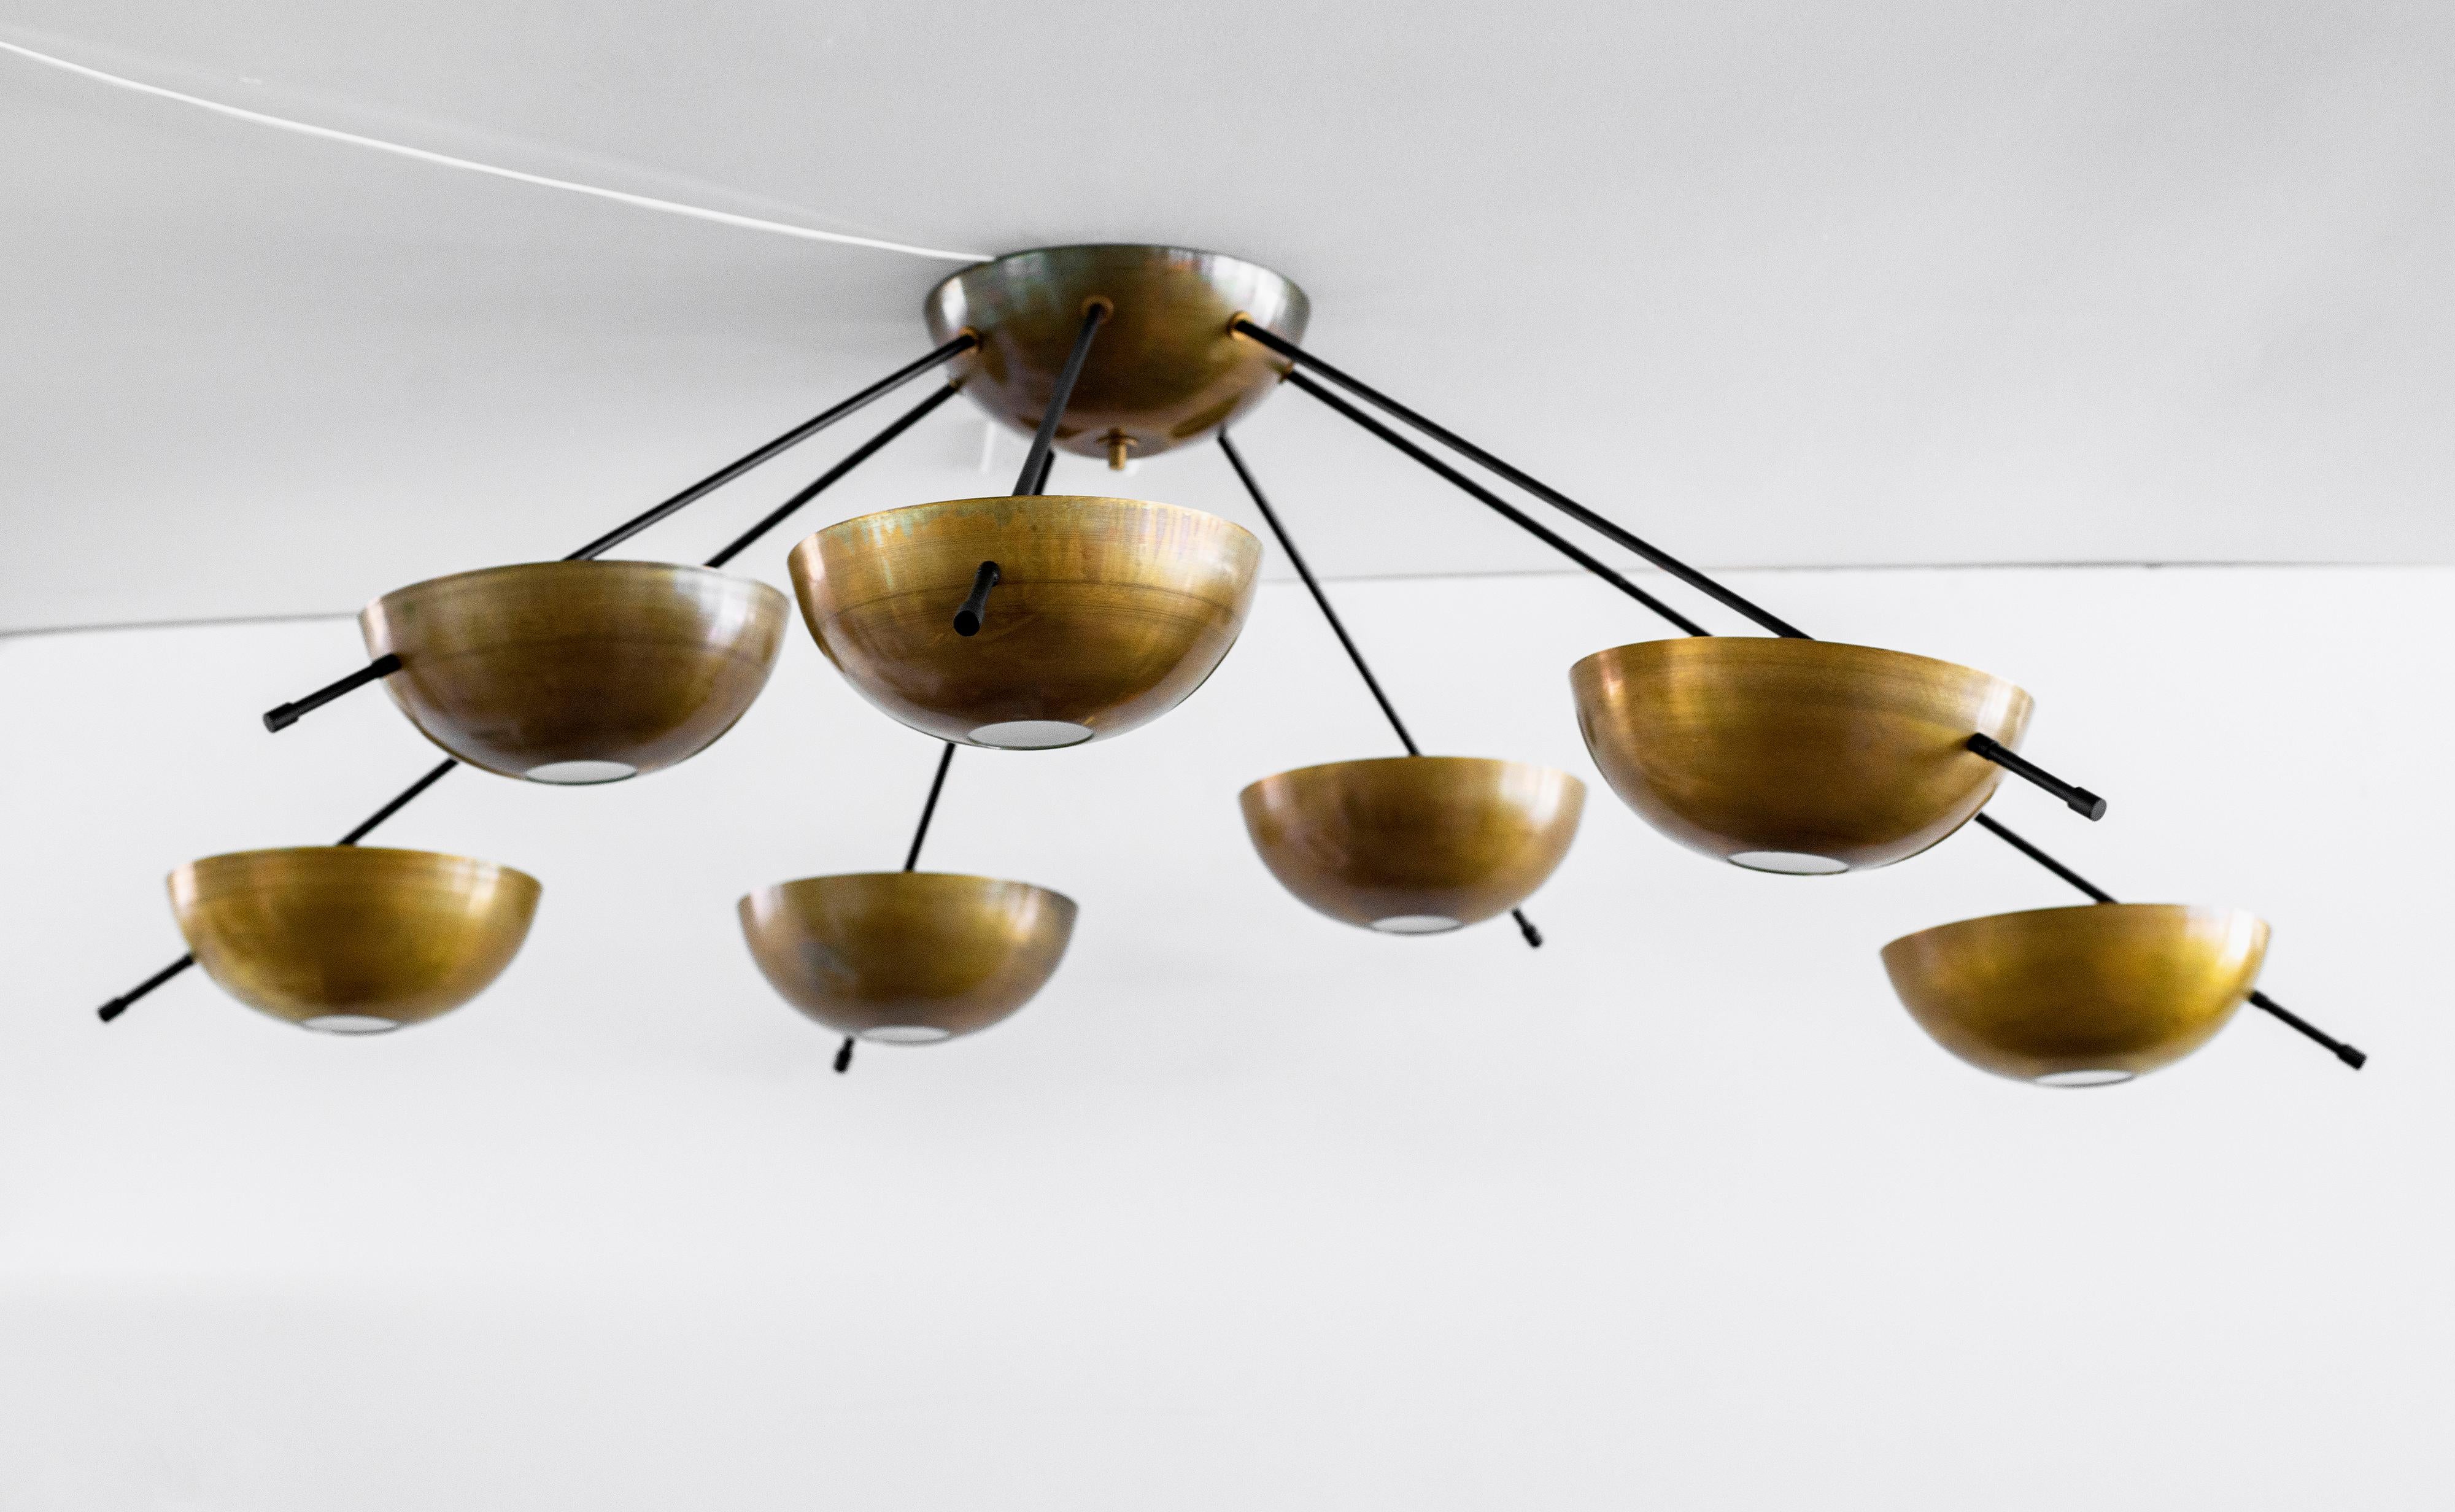 Incredible Italian ceiling light with 7 solid brass dome cups floating on thin black metal arms. Illuminates beautifully. Newly produced in Italy, wired to American standards.